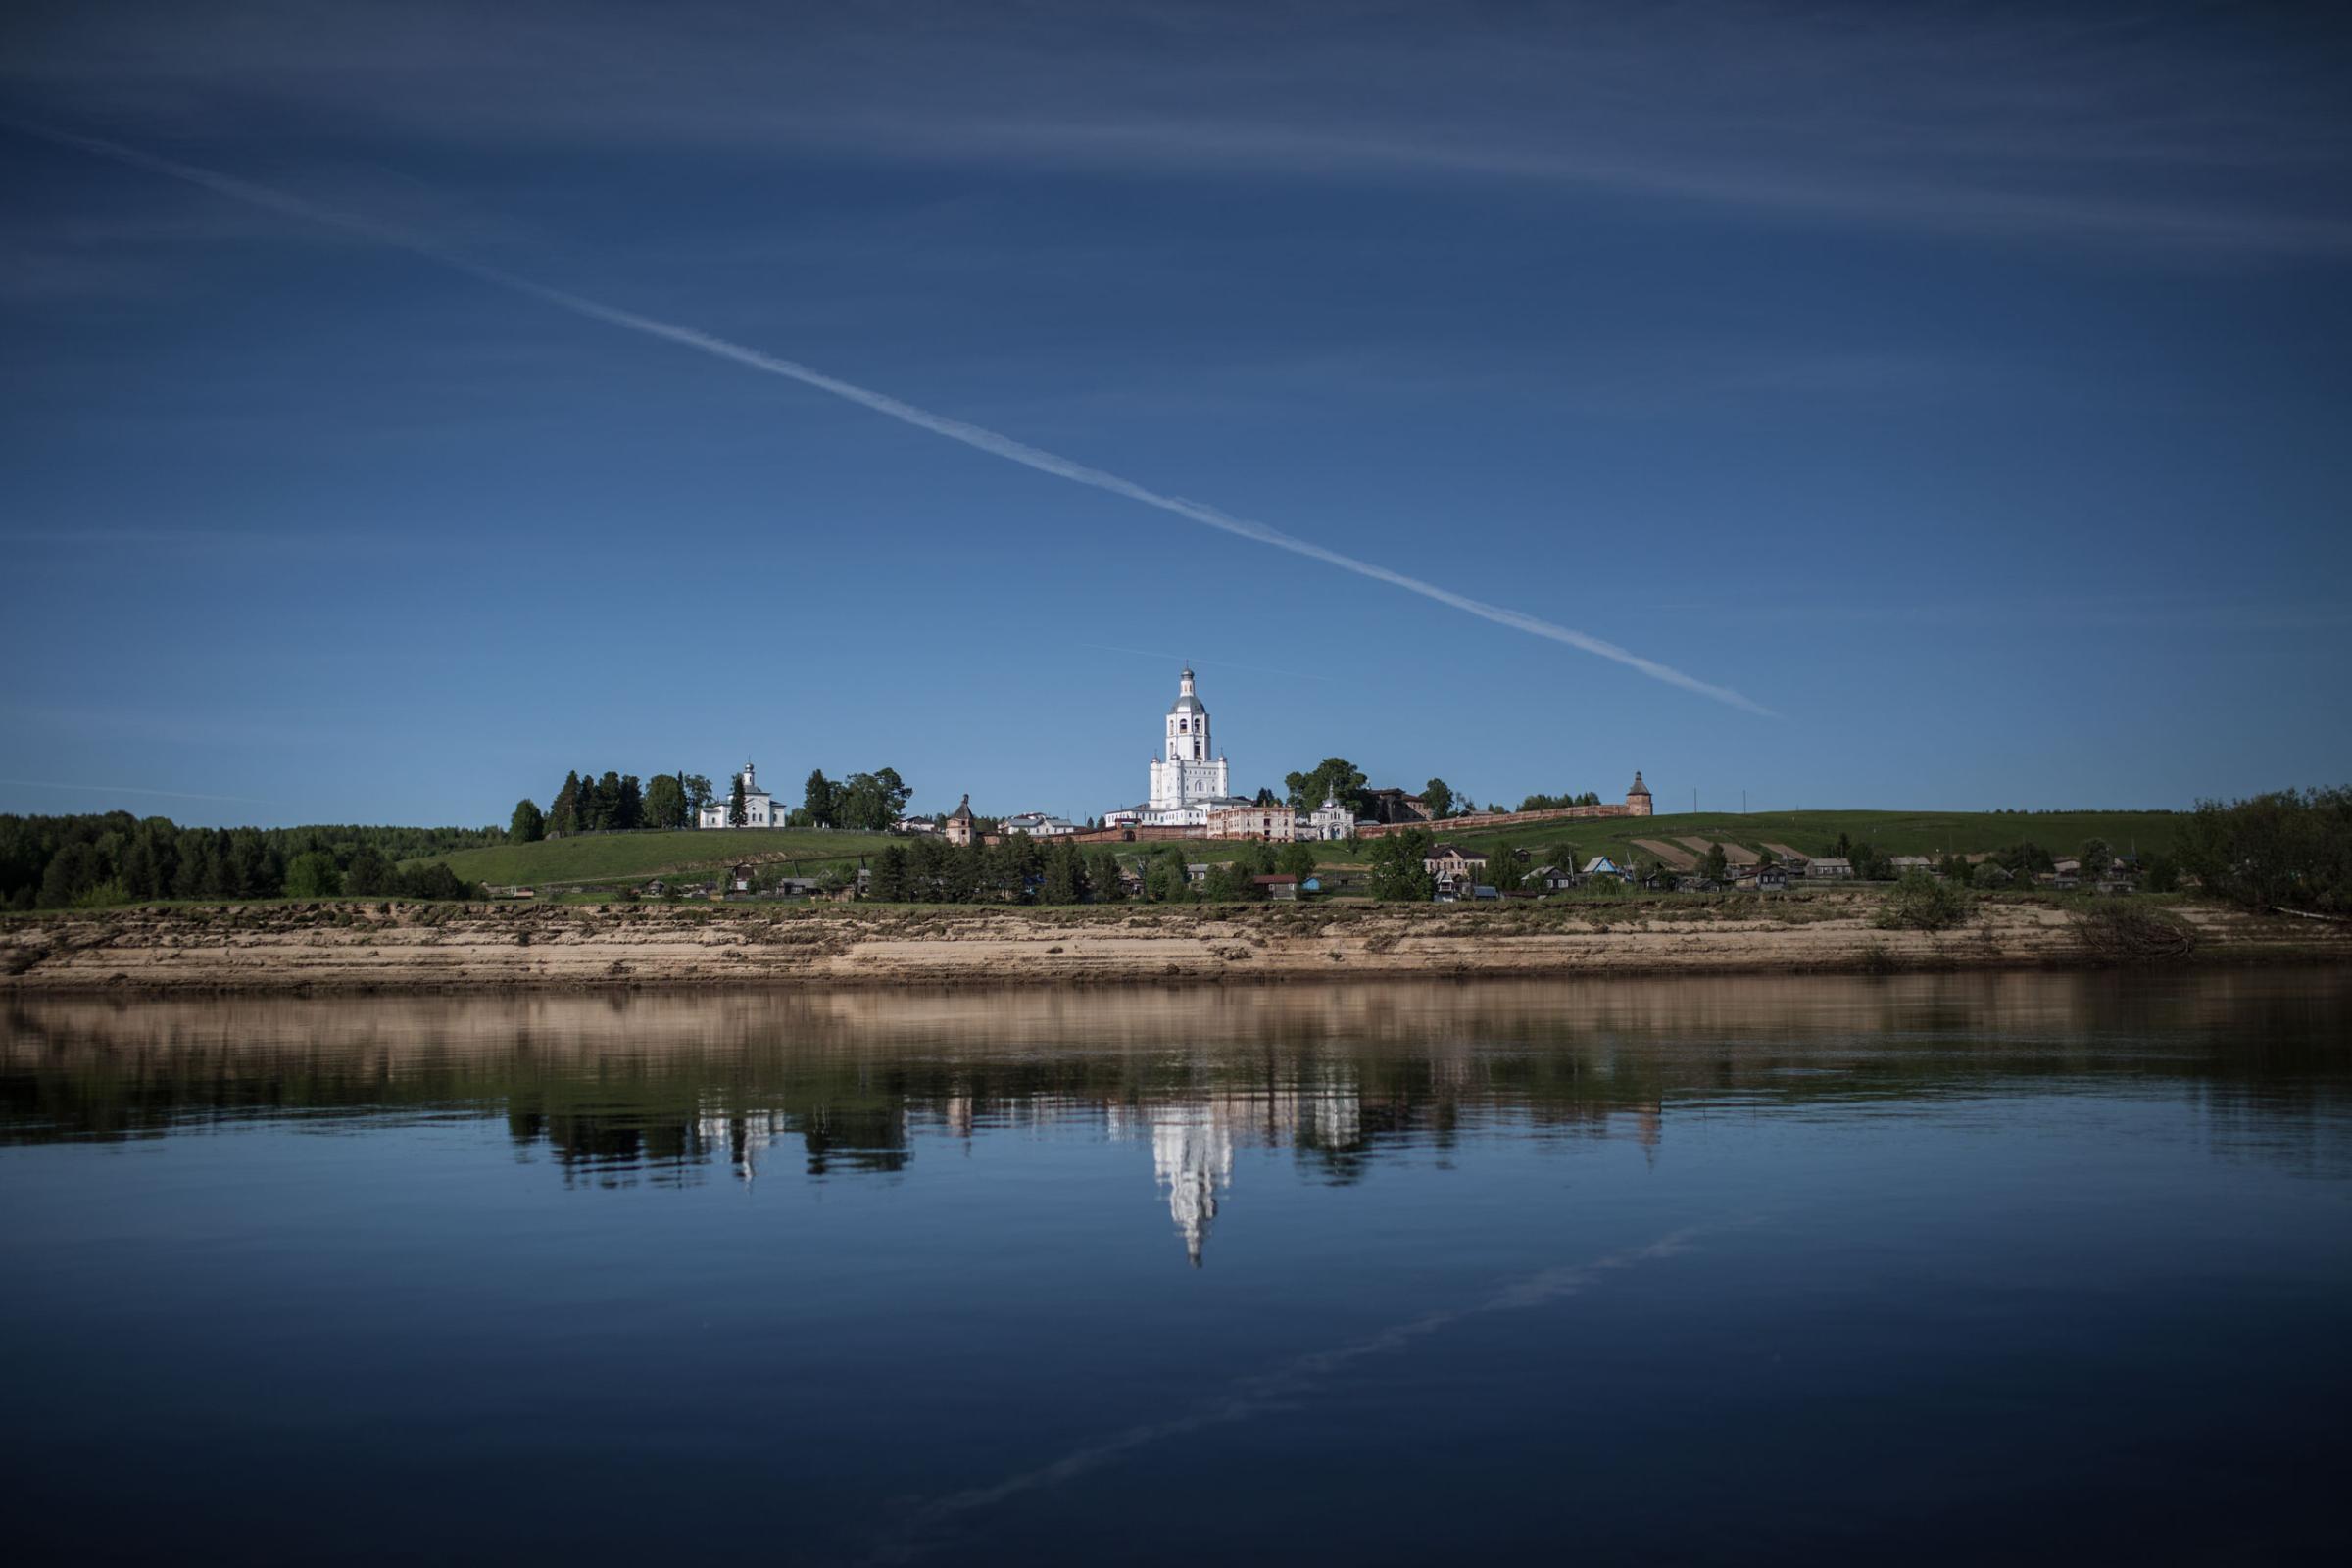 Ulyanovsky monastery, almost destroyed during Soviet time is seen on the Vychegda River.